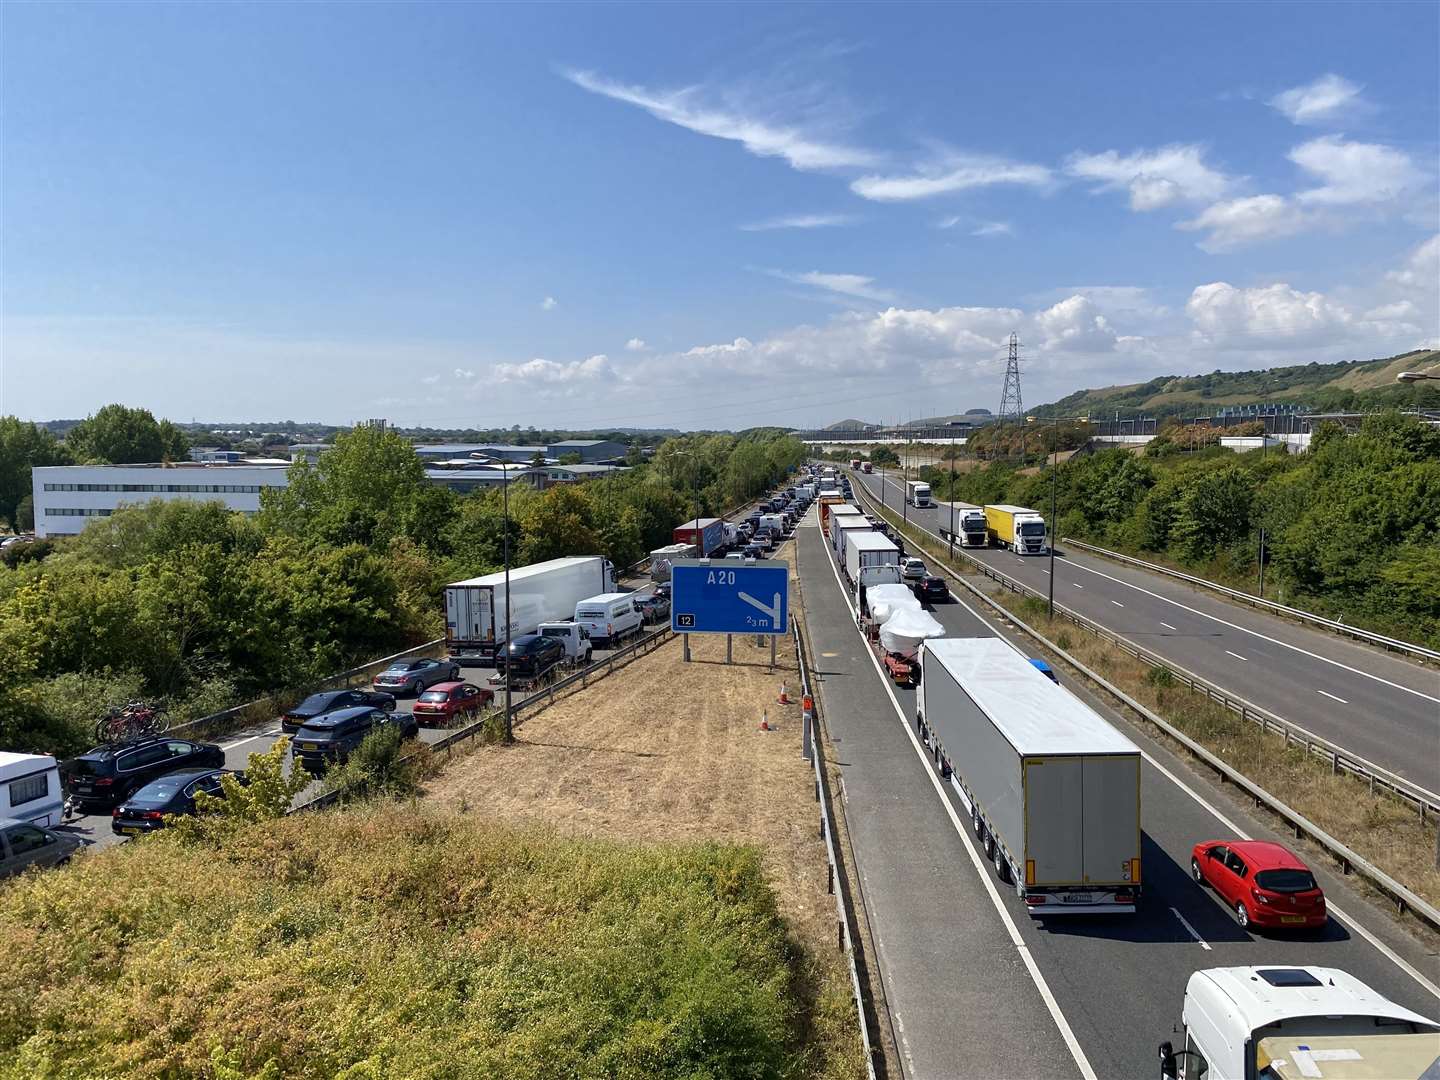 Traffic queues at the Eurotunnel terminal on the Londonbound carriageway of the M20 at Folkestone as the summer holiday traffic woes turn Kent's motorways into car parks